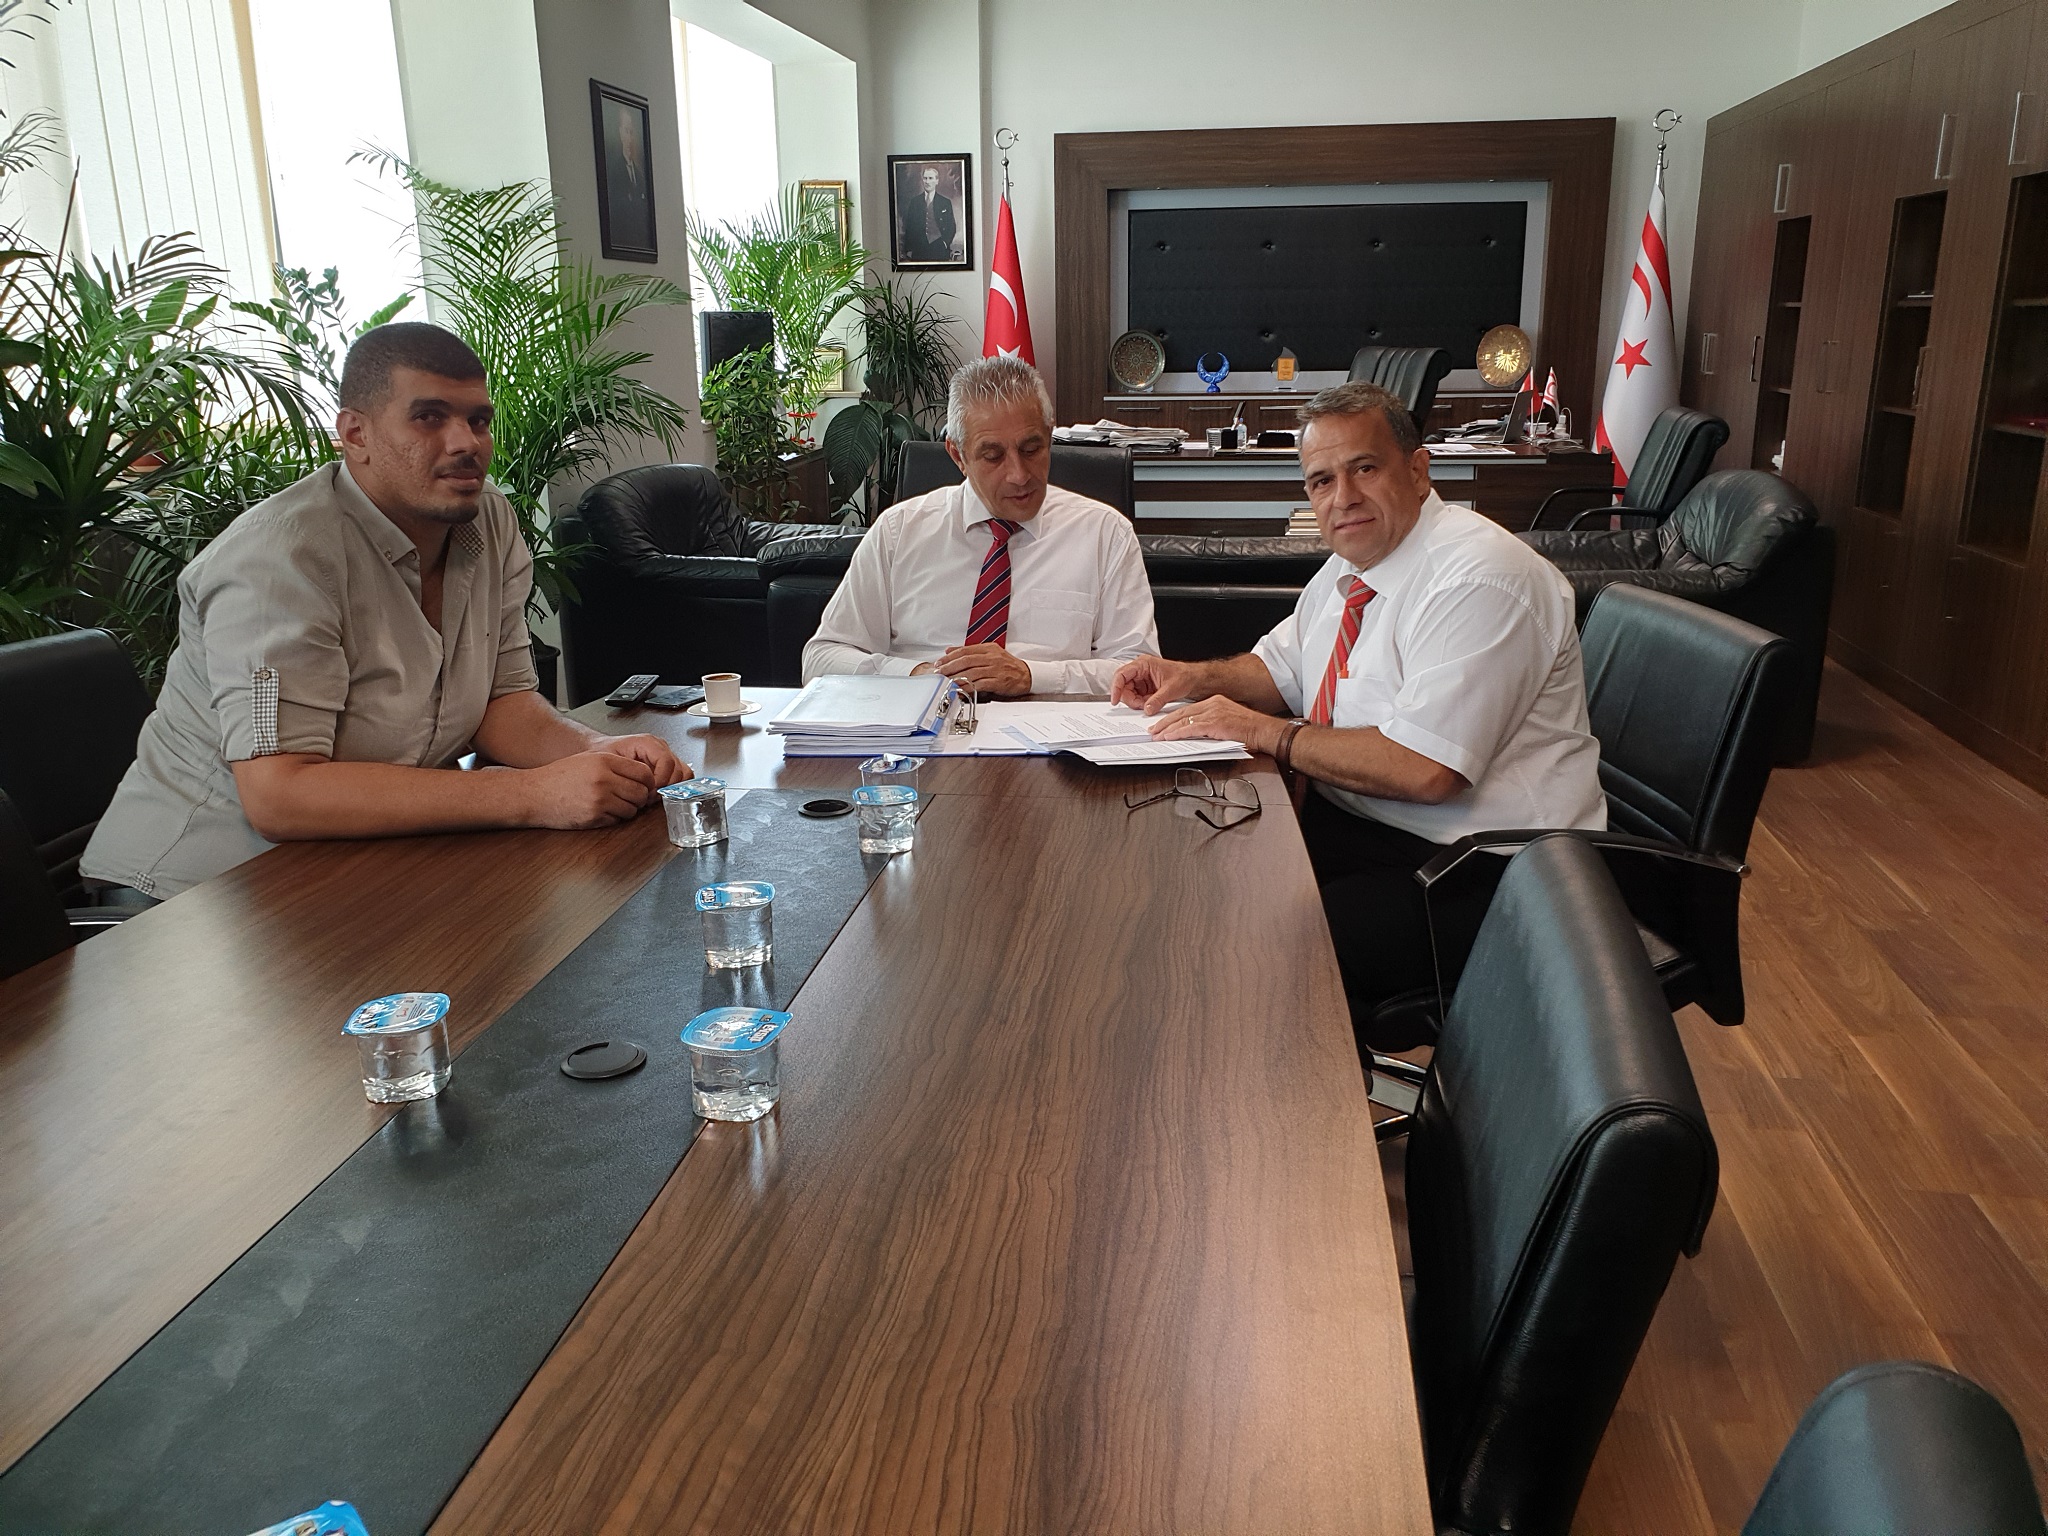 Results of Research conducted by Near East University Faculty of Civil and Environmental Engineering on Global Climate Change and Obtaining Clean Energy In TRNC Presented to Minister of Economy and Energy Hasan Taçoy